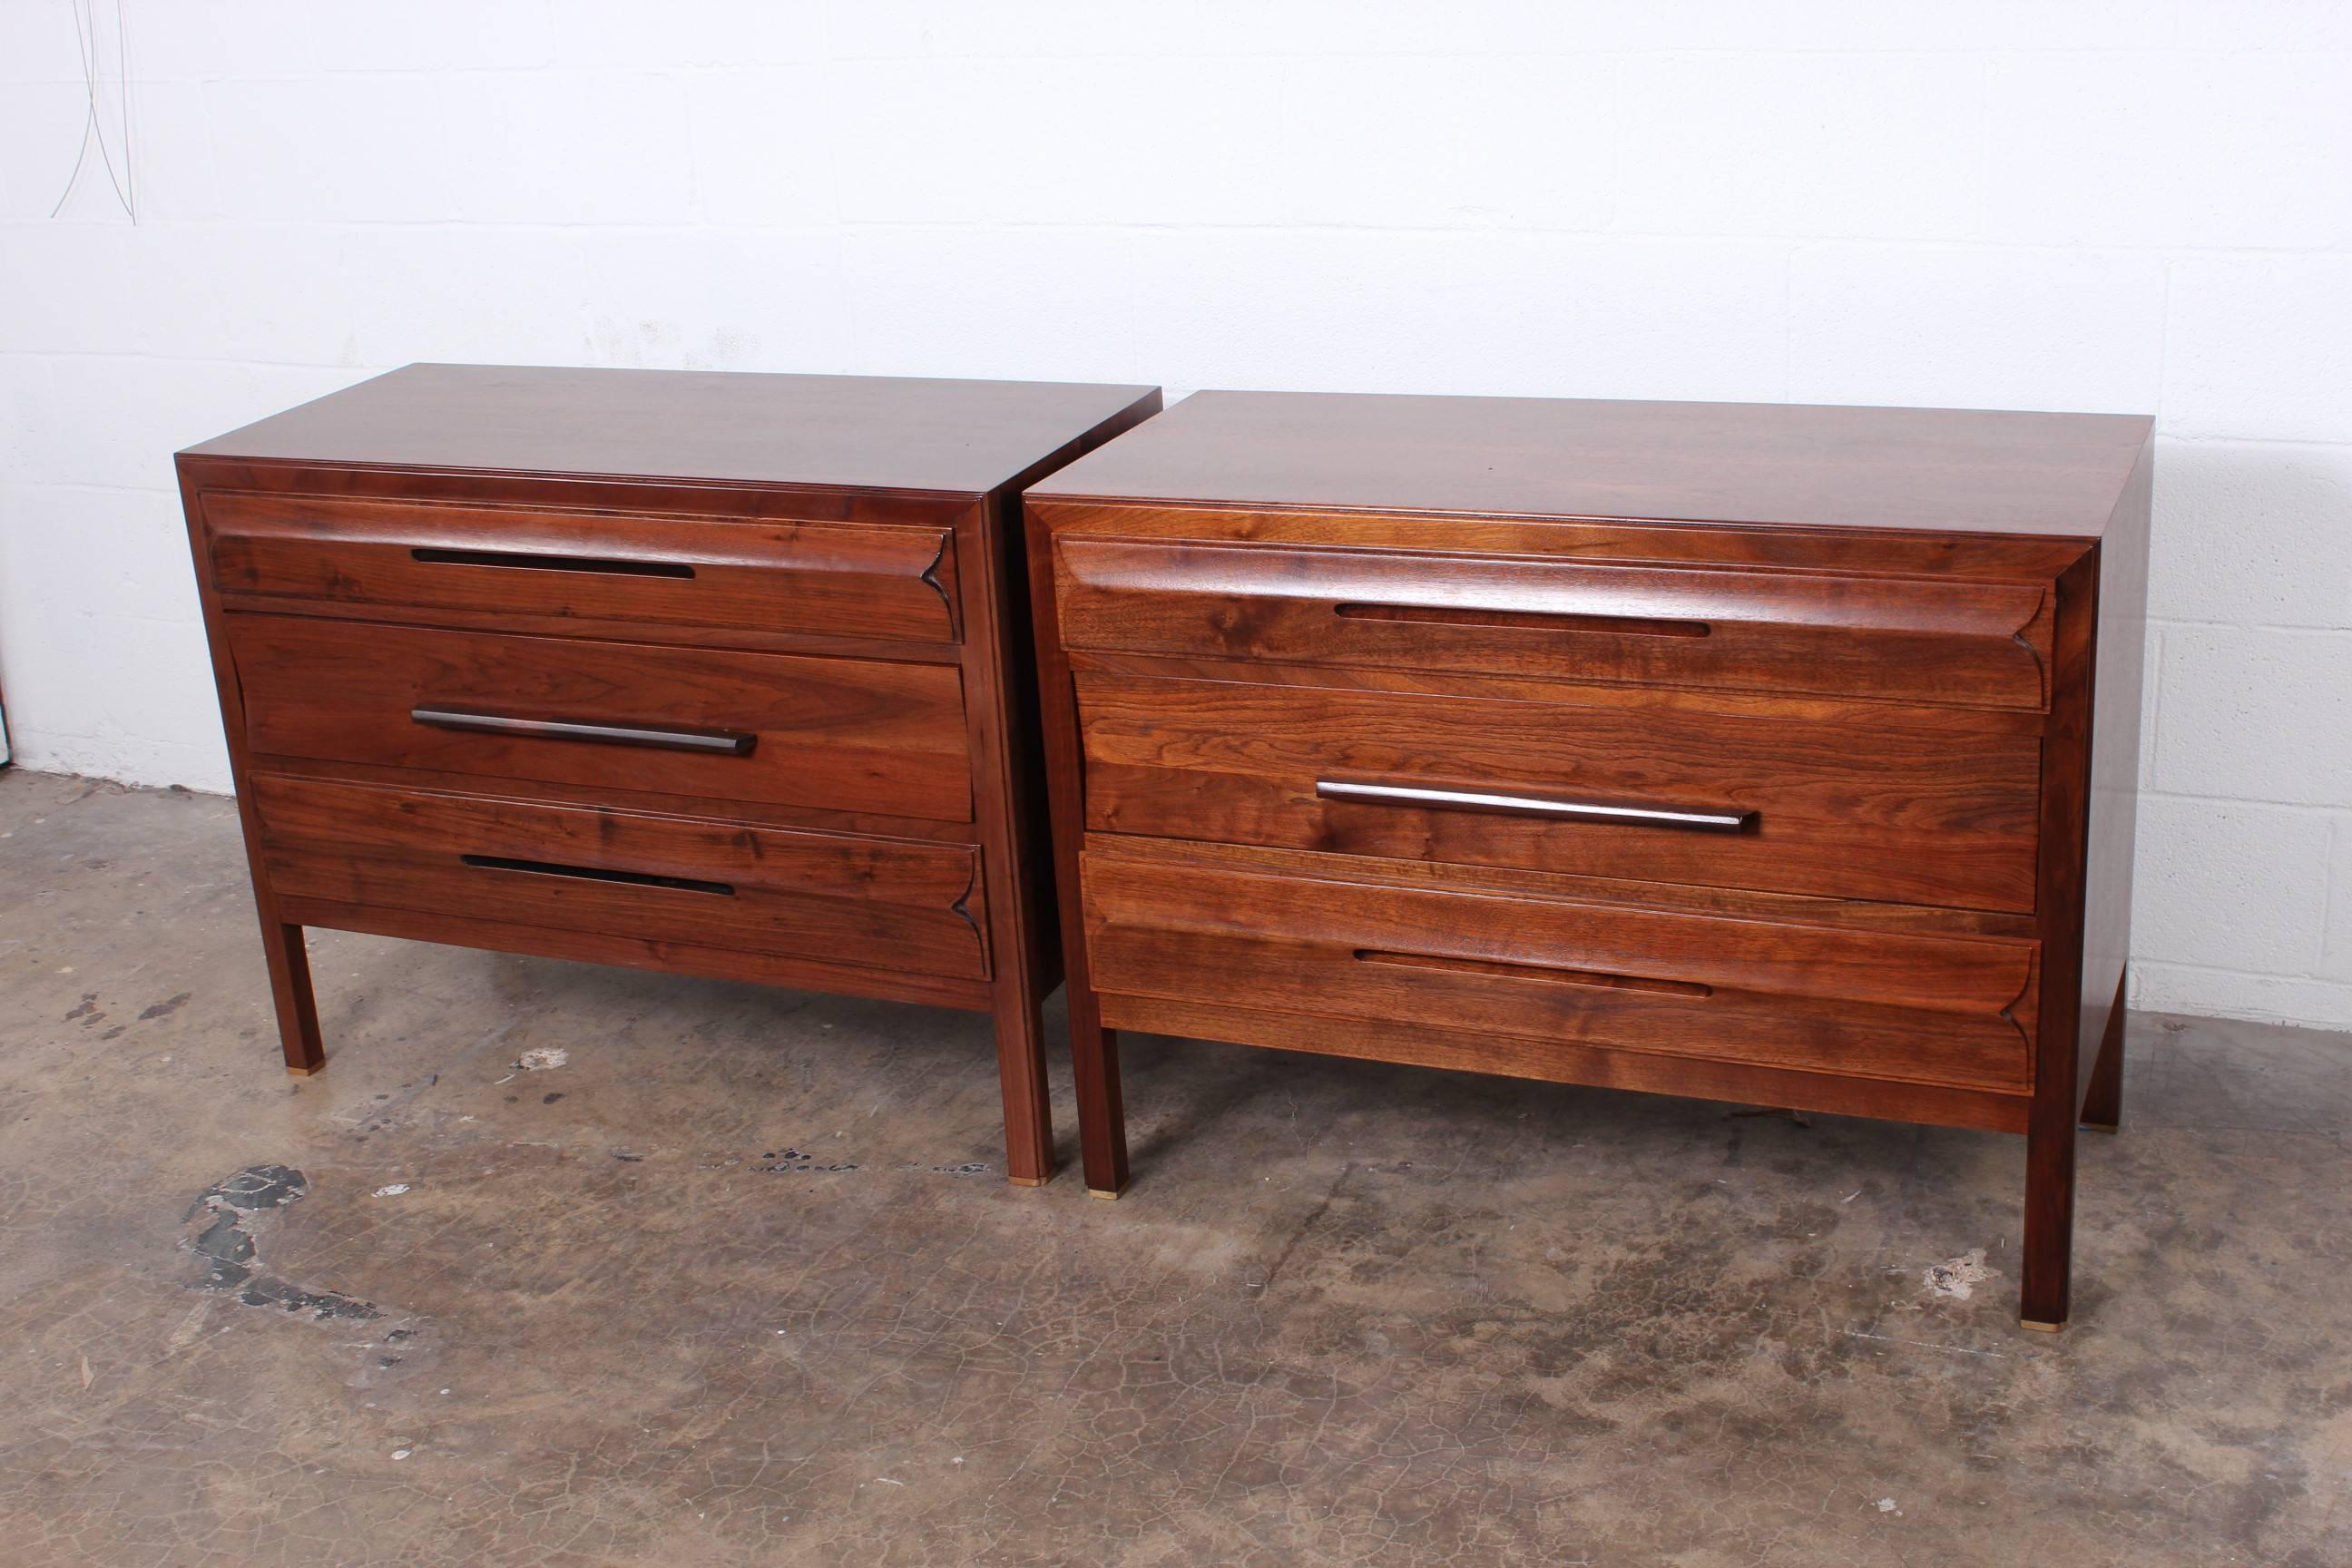 Mid-20th Century Pair of Chests by Edward Wormley for Dunbar